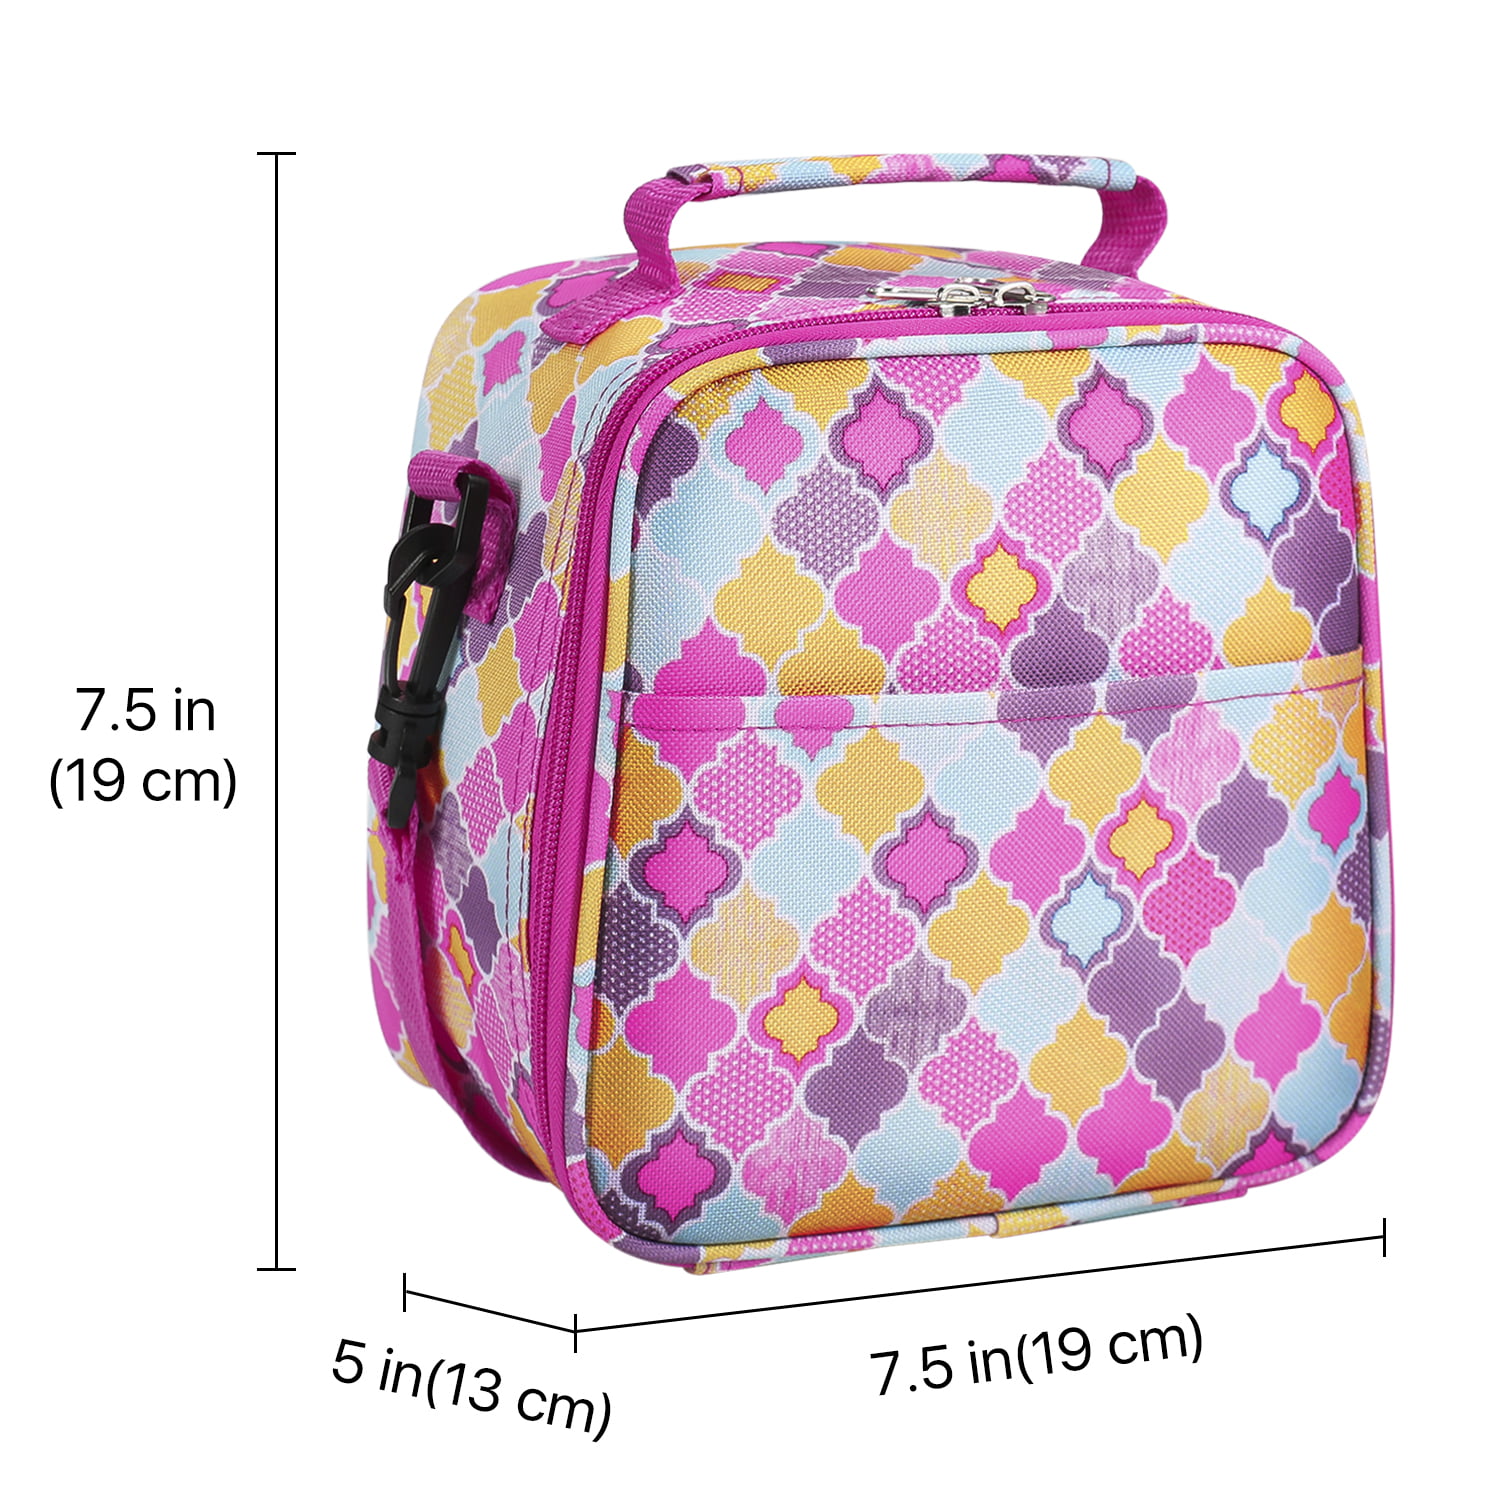 RLGPBON Kids Lunch Bag,Insulated Lunch Box for Girls Boys,Lunch Bag Toddler  Teen,School Daycare Cute Travel bags